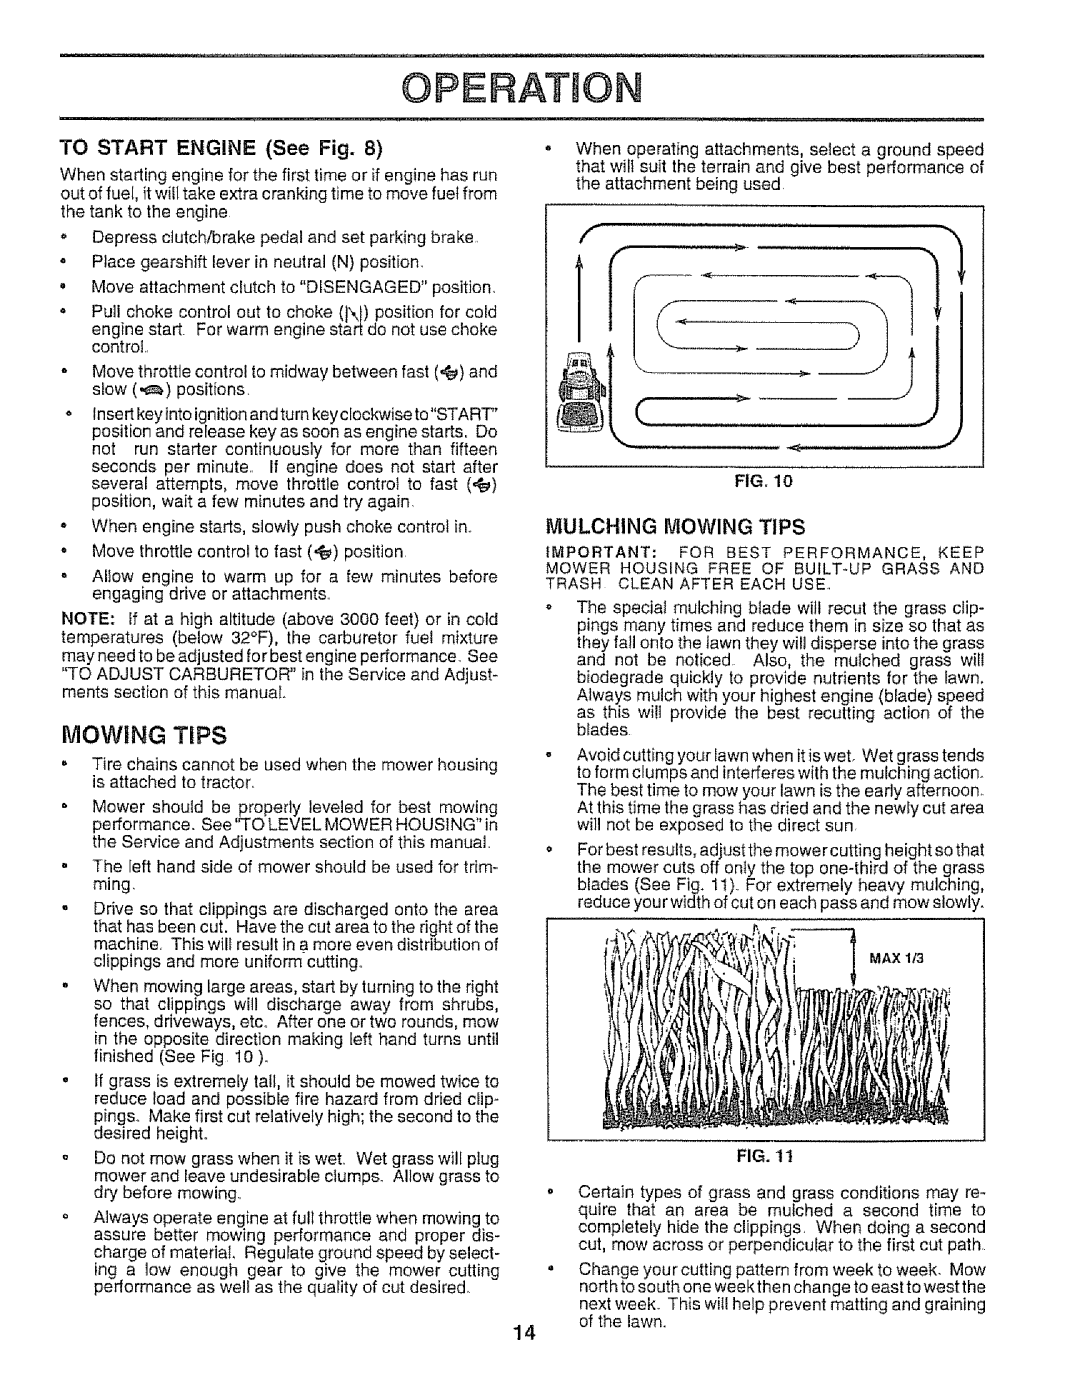 Craftsman 917.252560 manual Opeiratuo, Mowing Tips, Fig 